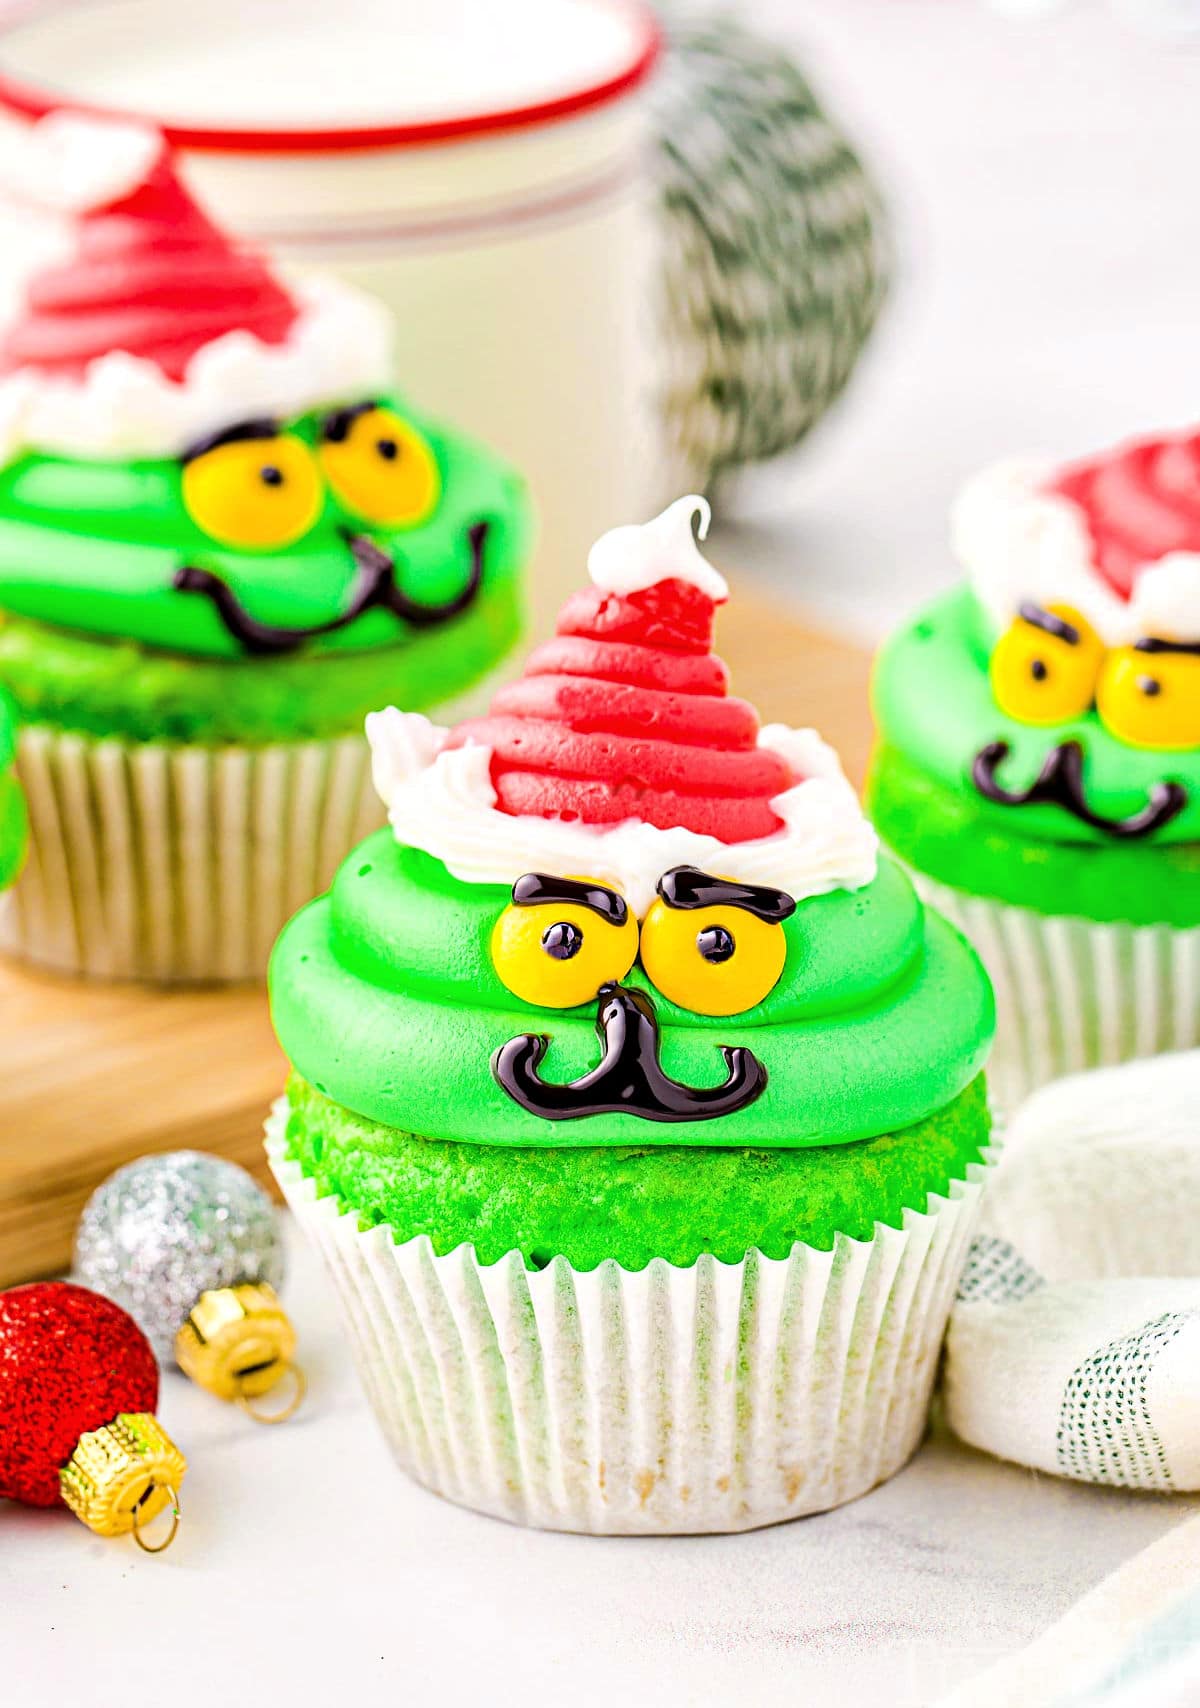 christmas cupcakes decorated like the grinch with red santa hat.